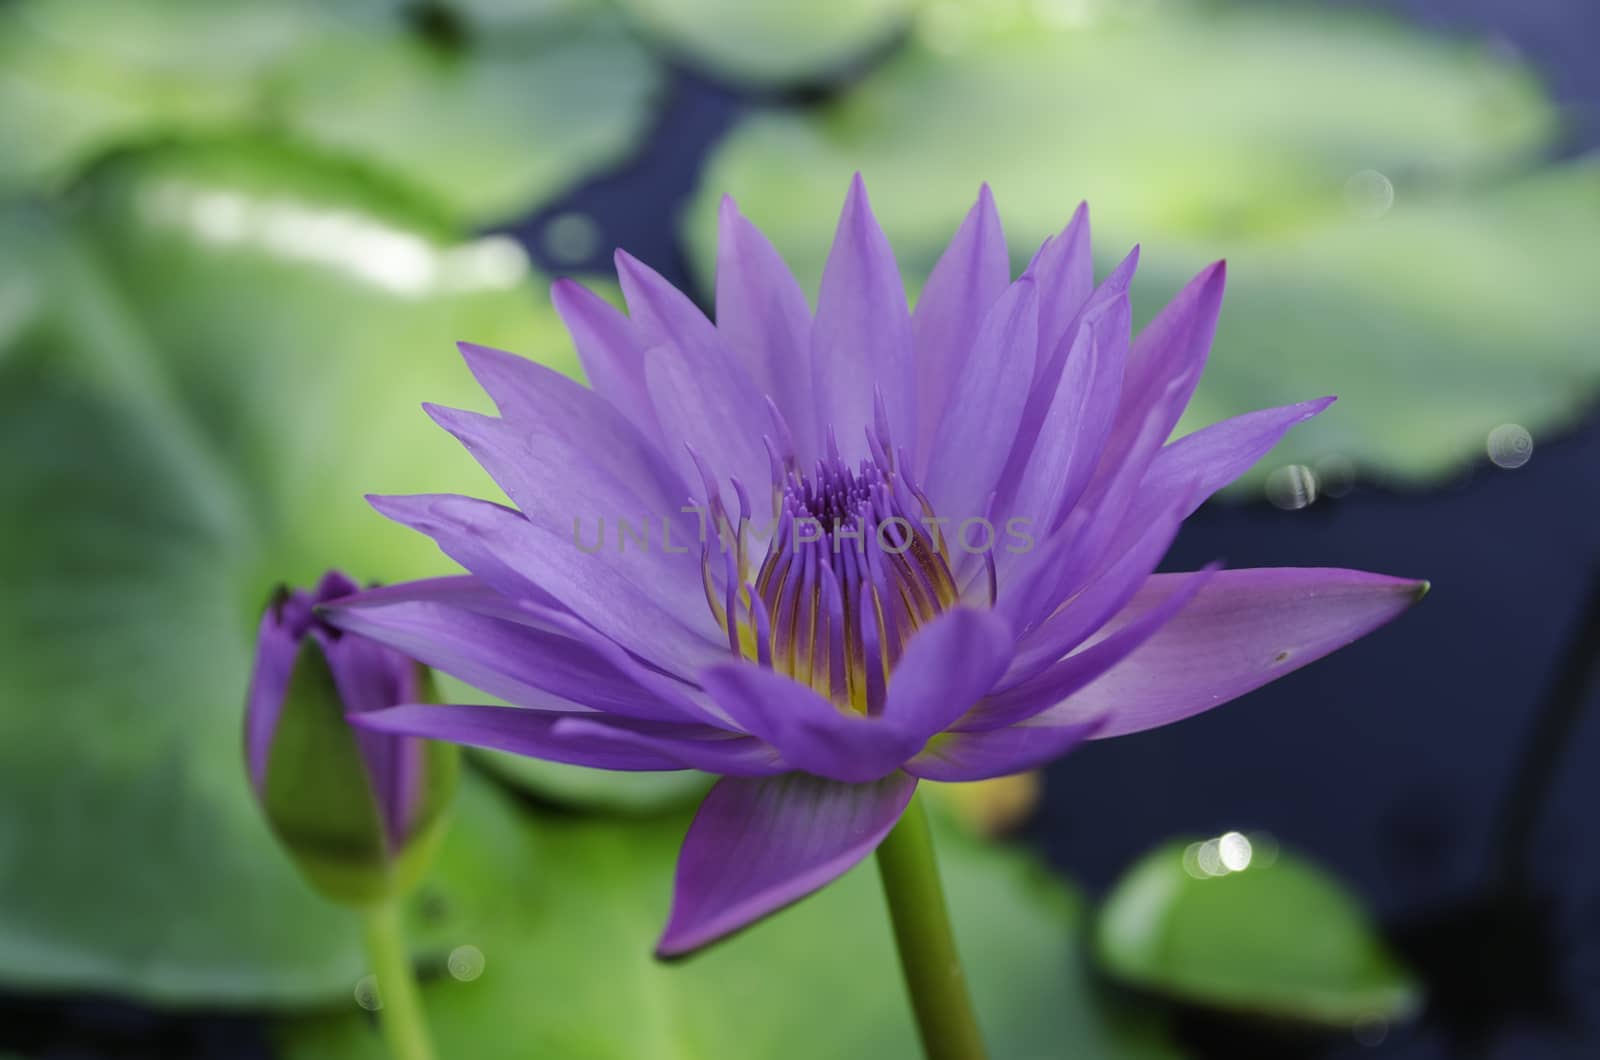 violet lotus and green leaves in the pond